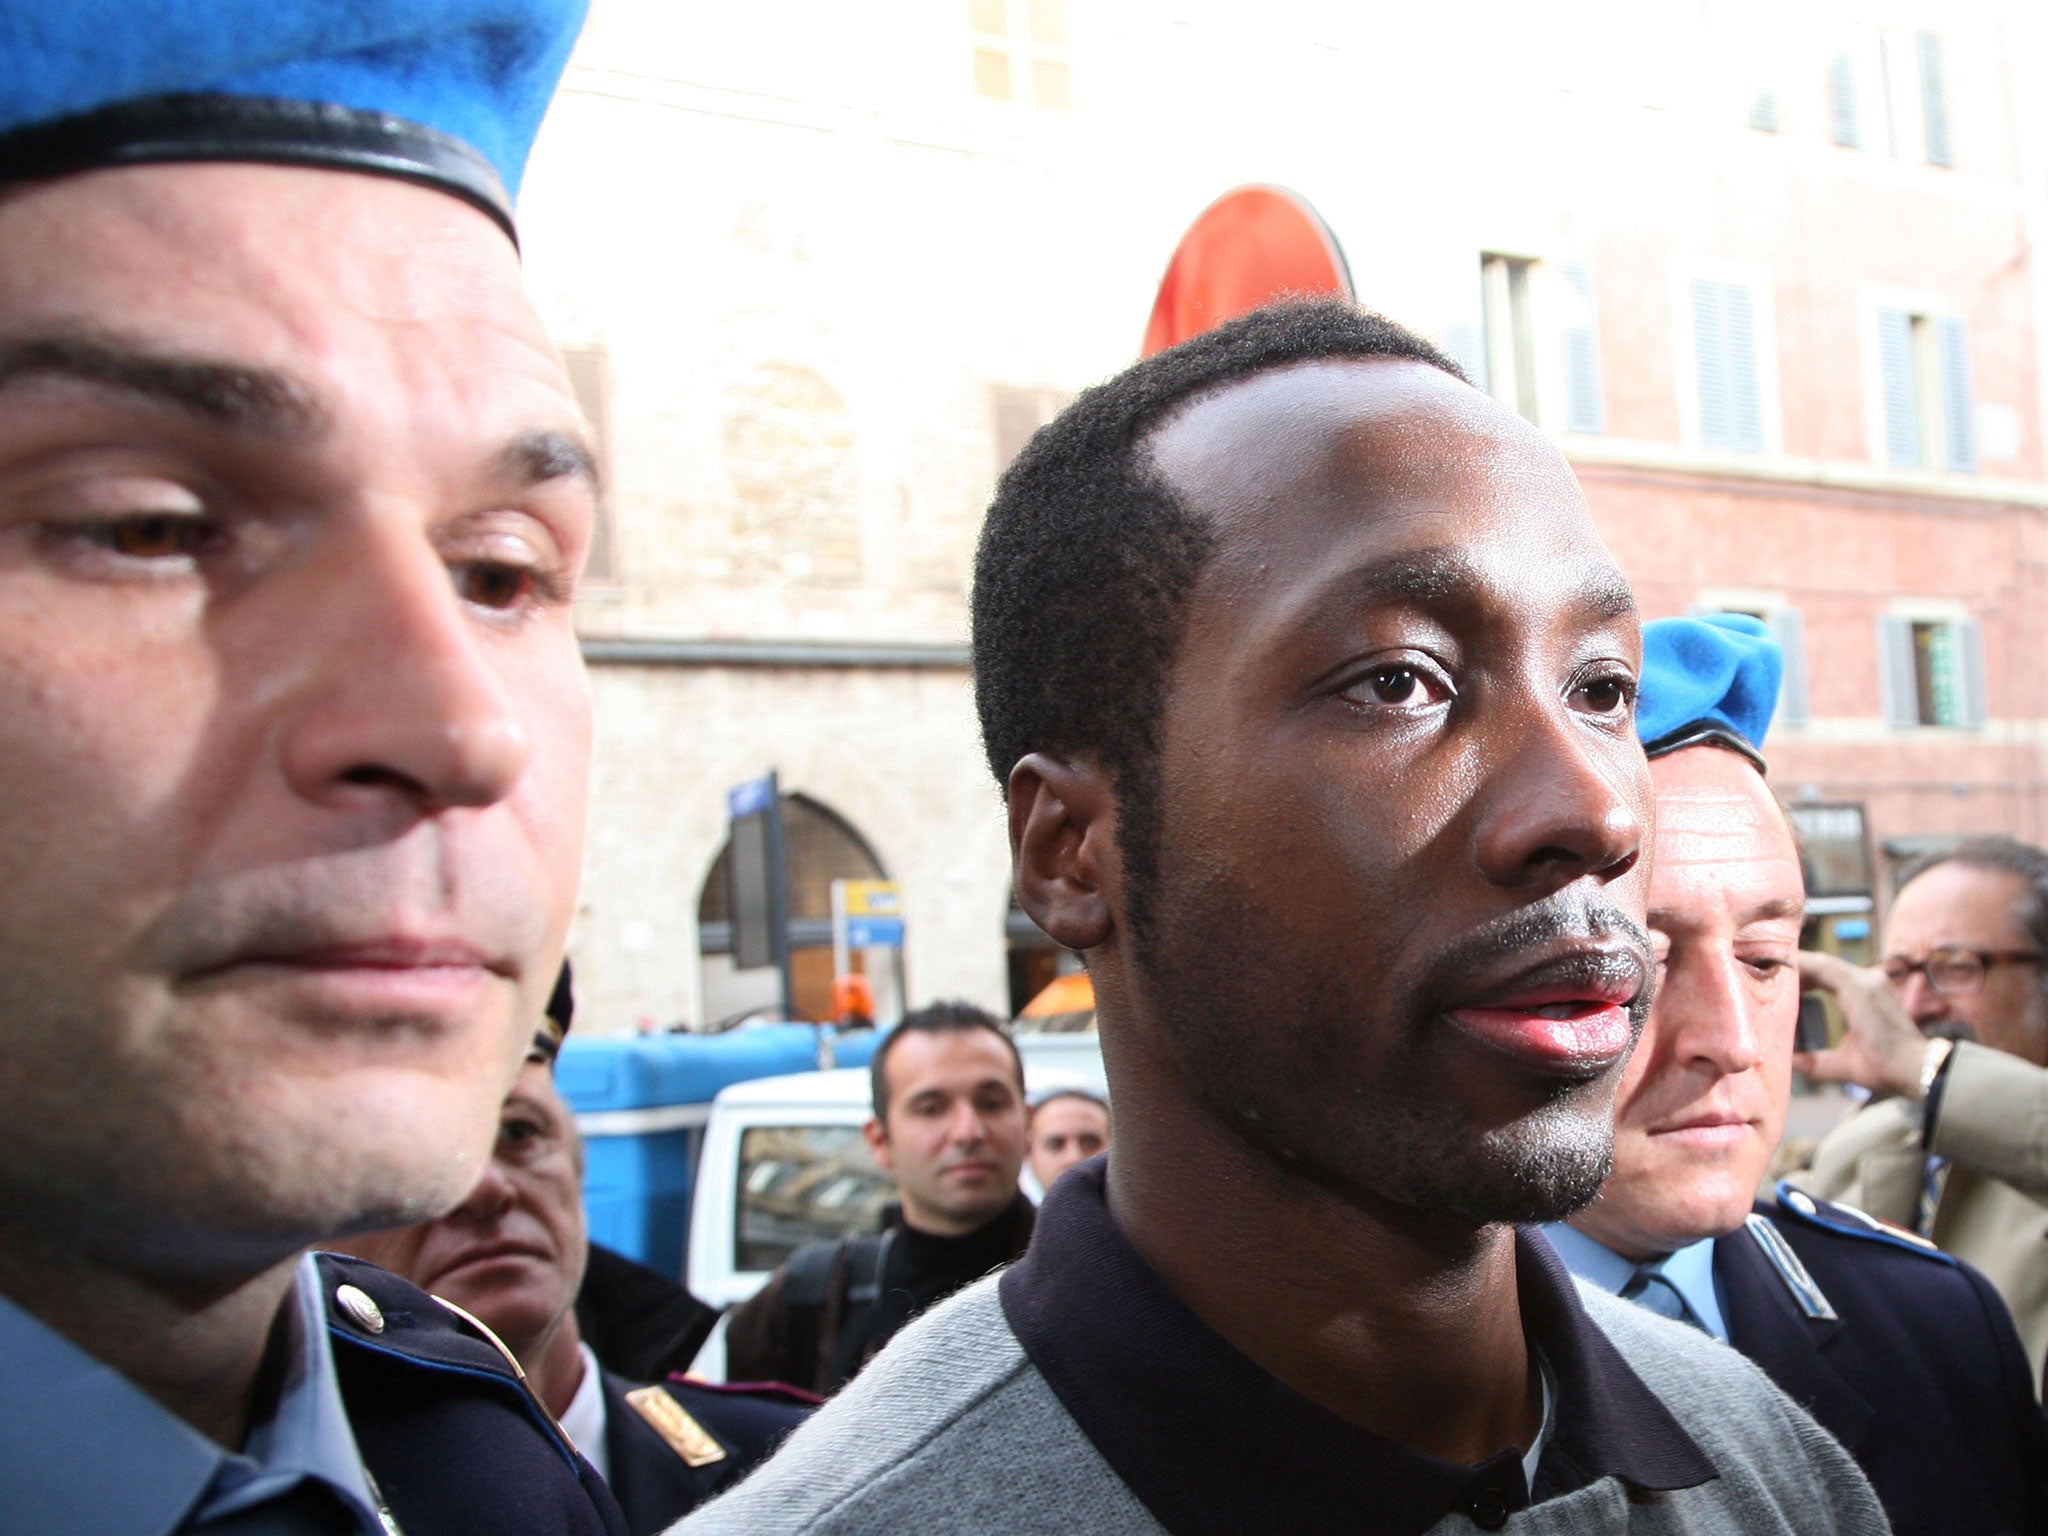 Rudy Guede arrives at the Perugia courthouse for the sitting of his appeal against the sentence he received in the Meredith Kercher murder trial